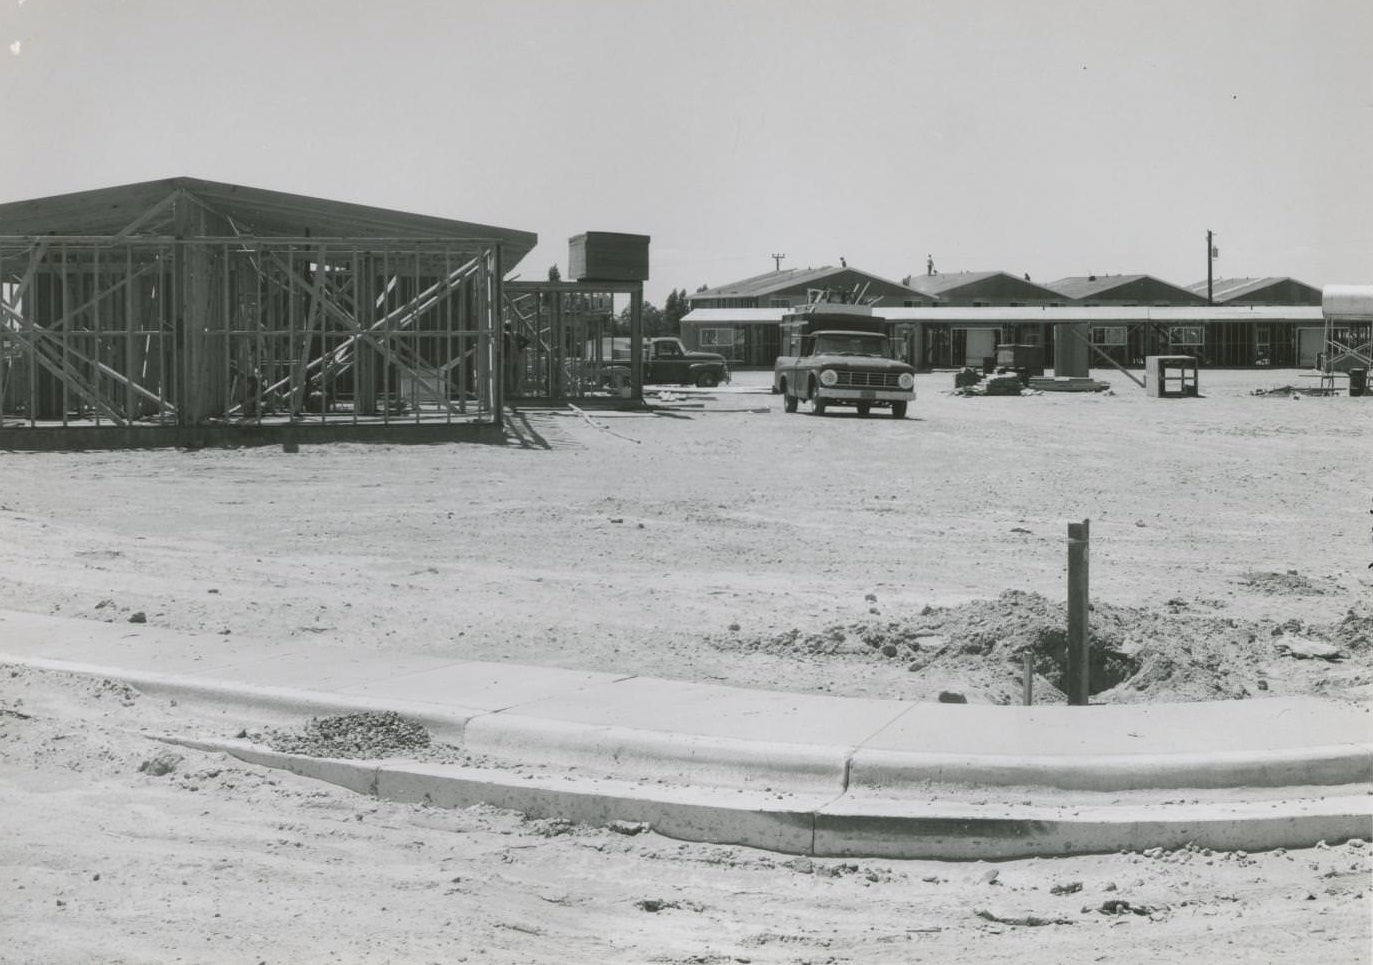 Family housing buildings under construction at the Bergstrom Air Force Base, 1970